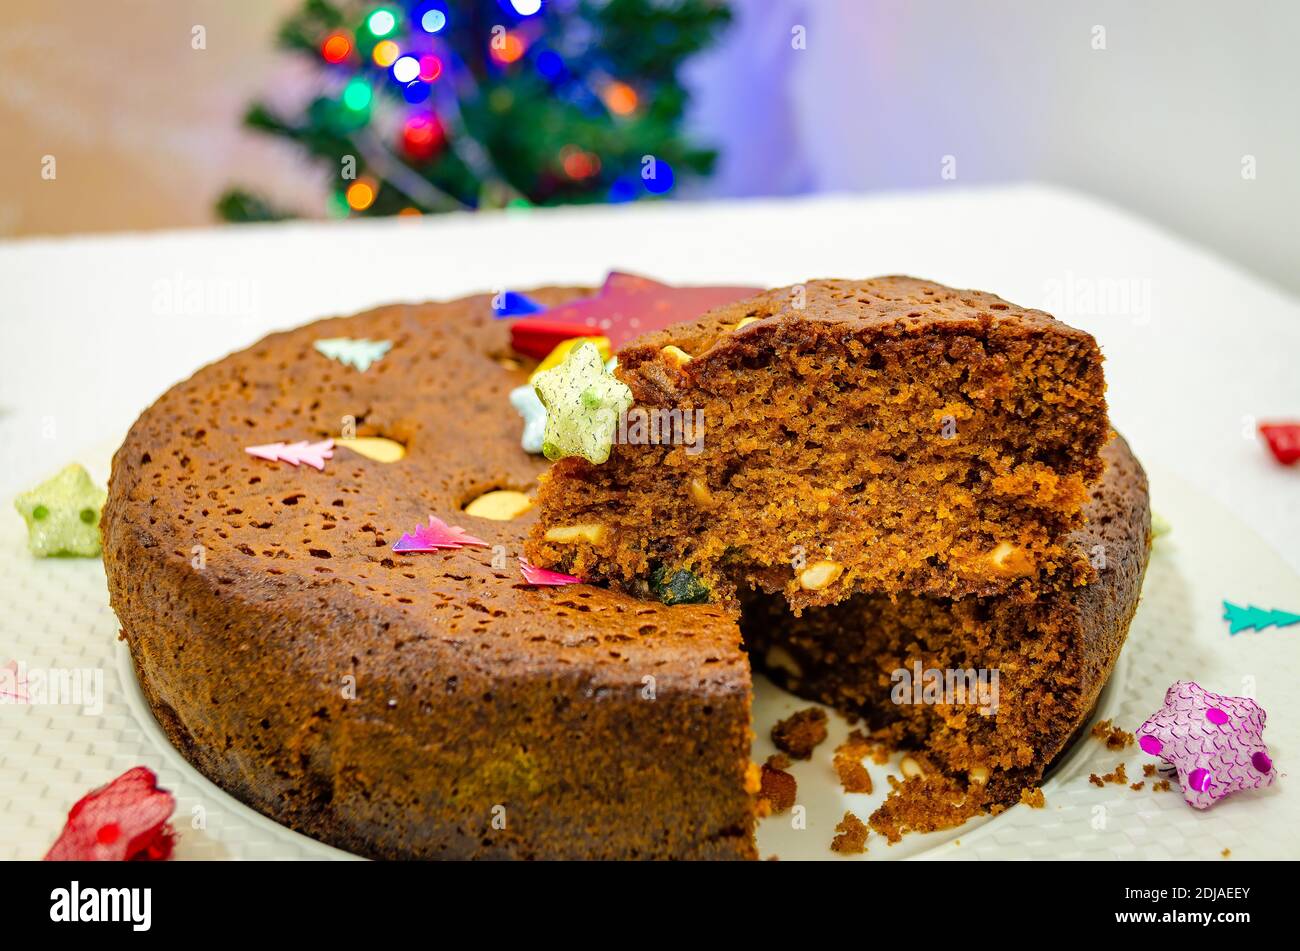 Closeup of a cut Plum Cake for Christmas celebrations. Cake is decorated and a Christmas Tree in the background. Stock Photo